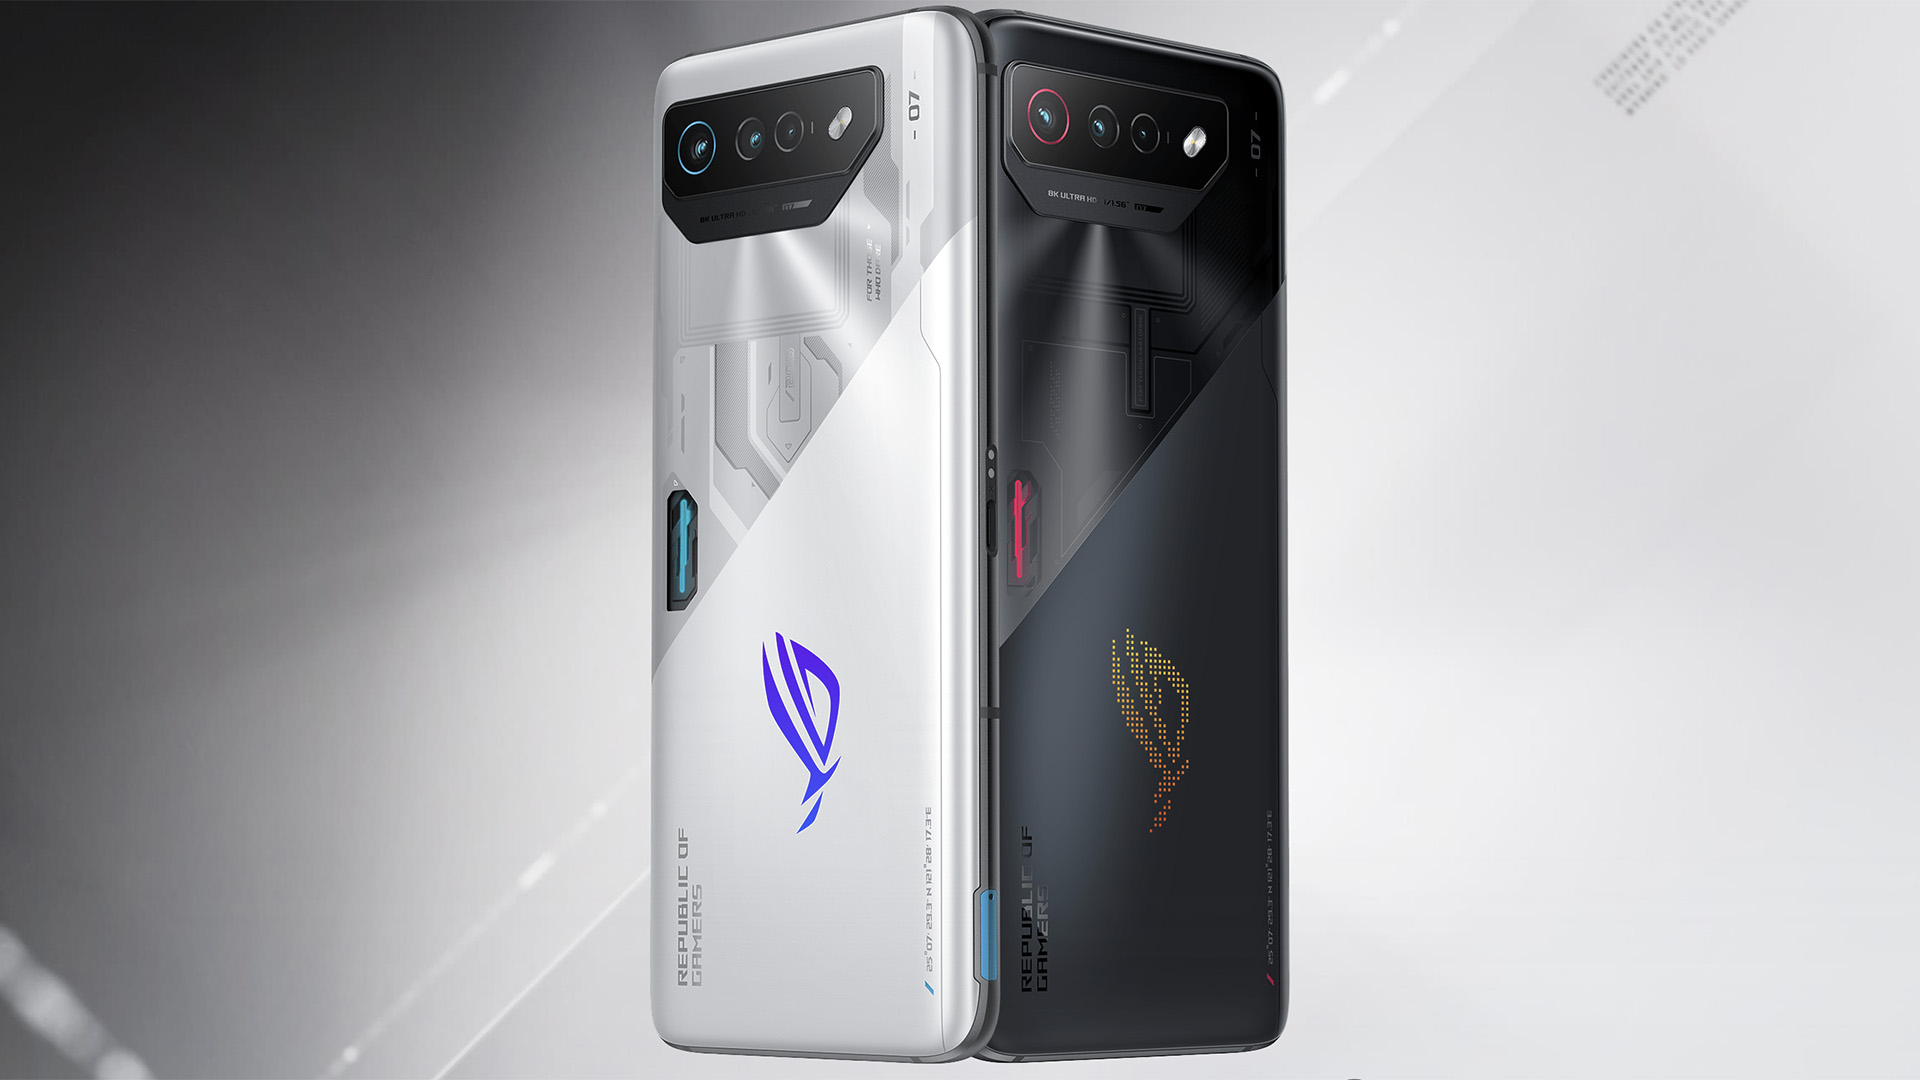 If leaked specs are correct, the Asus ROG Phone 8 is going to be a beast